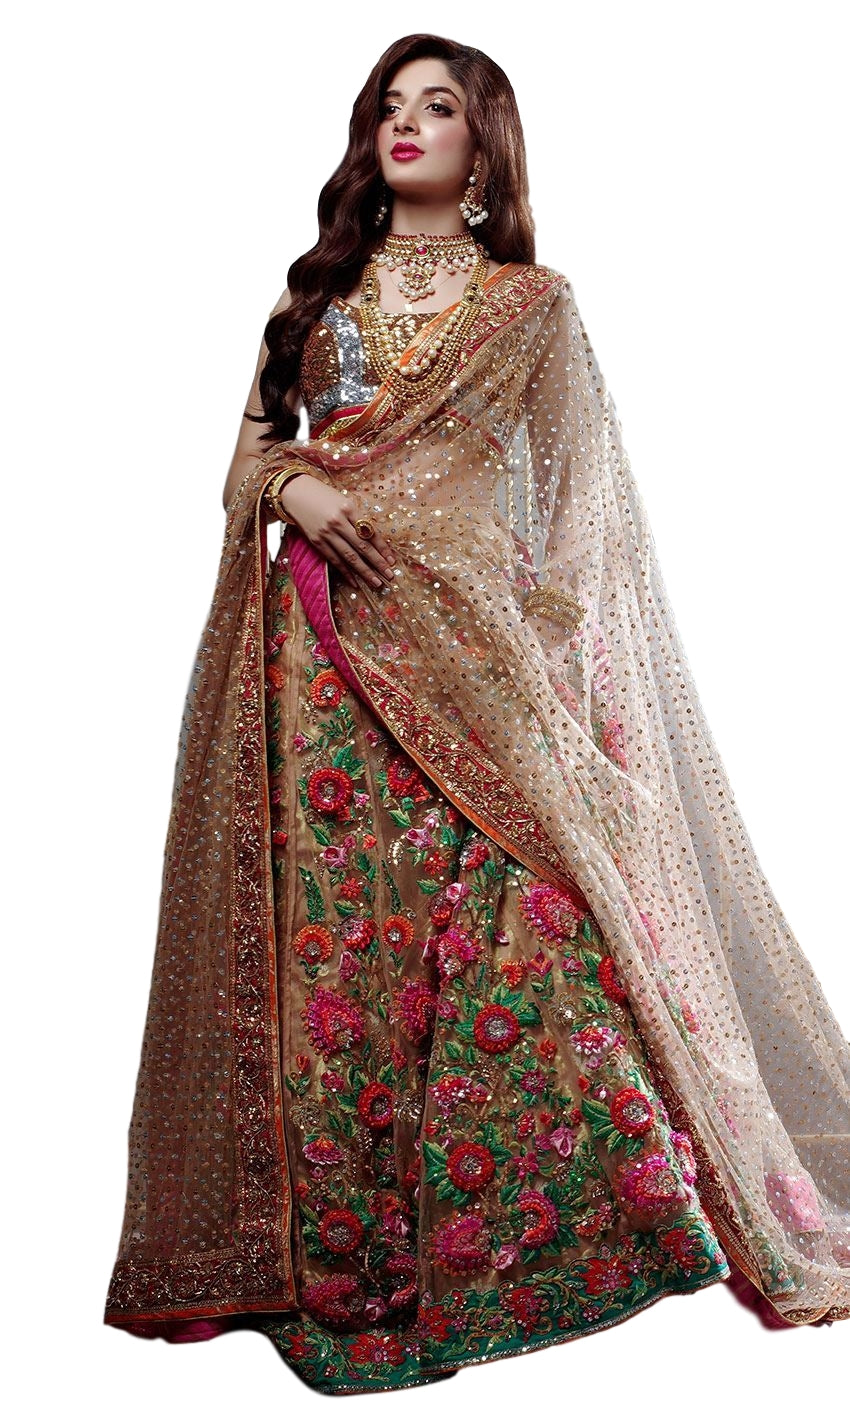 Fawn Color Wedding Lehenga With Floral Embroidery Panache Haute Couture 